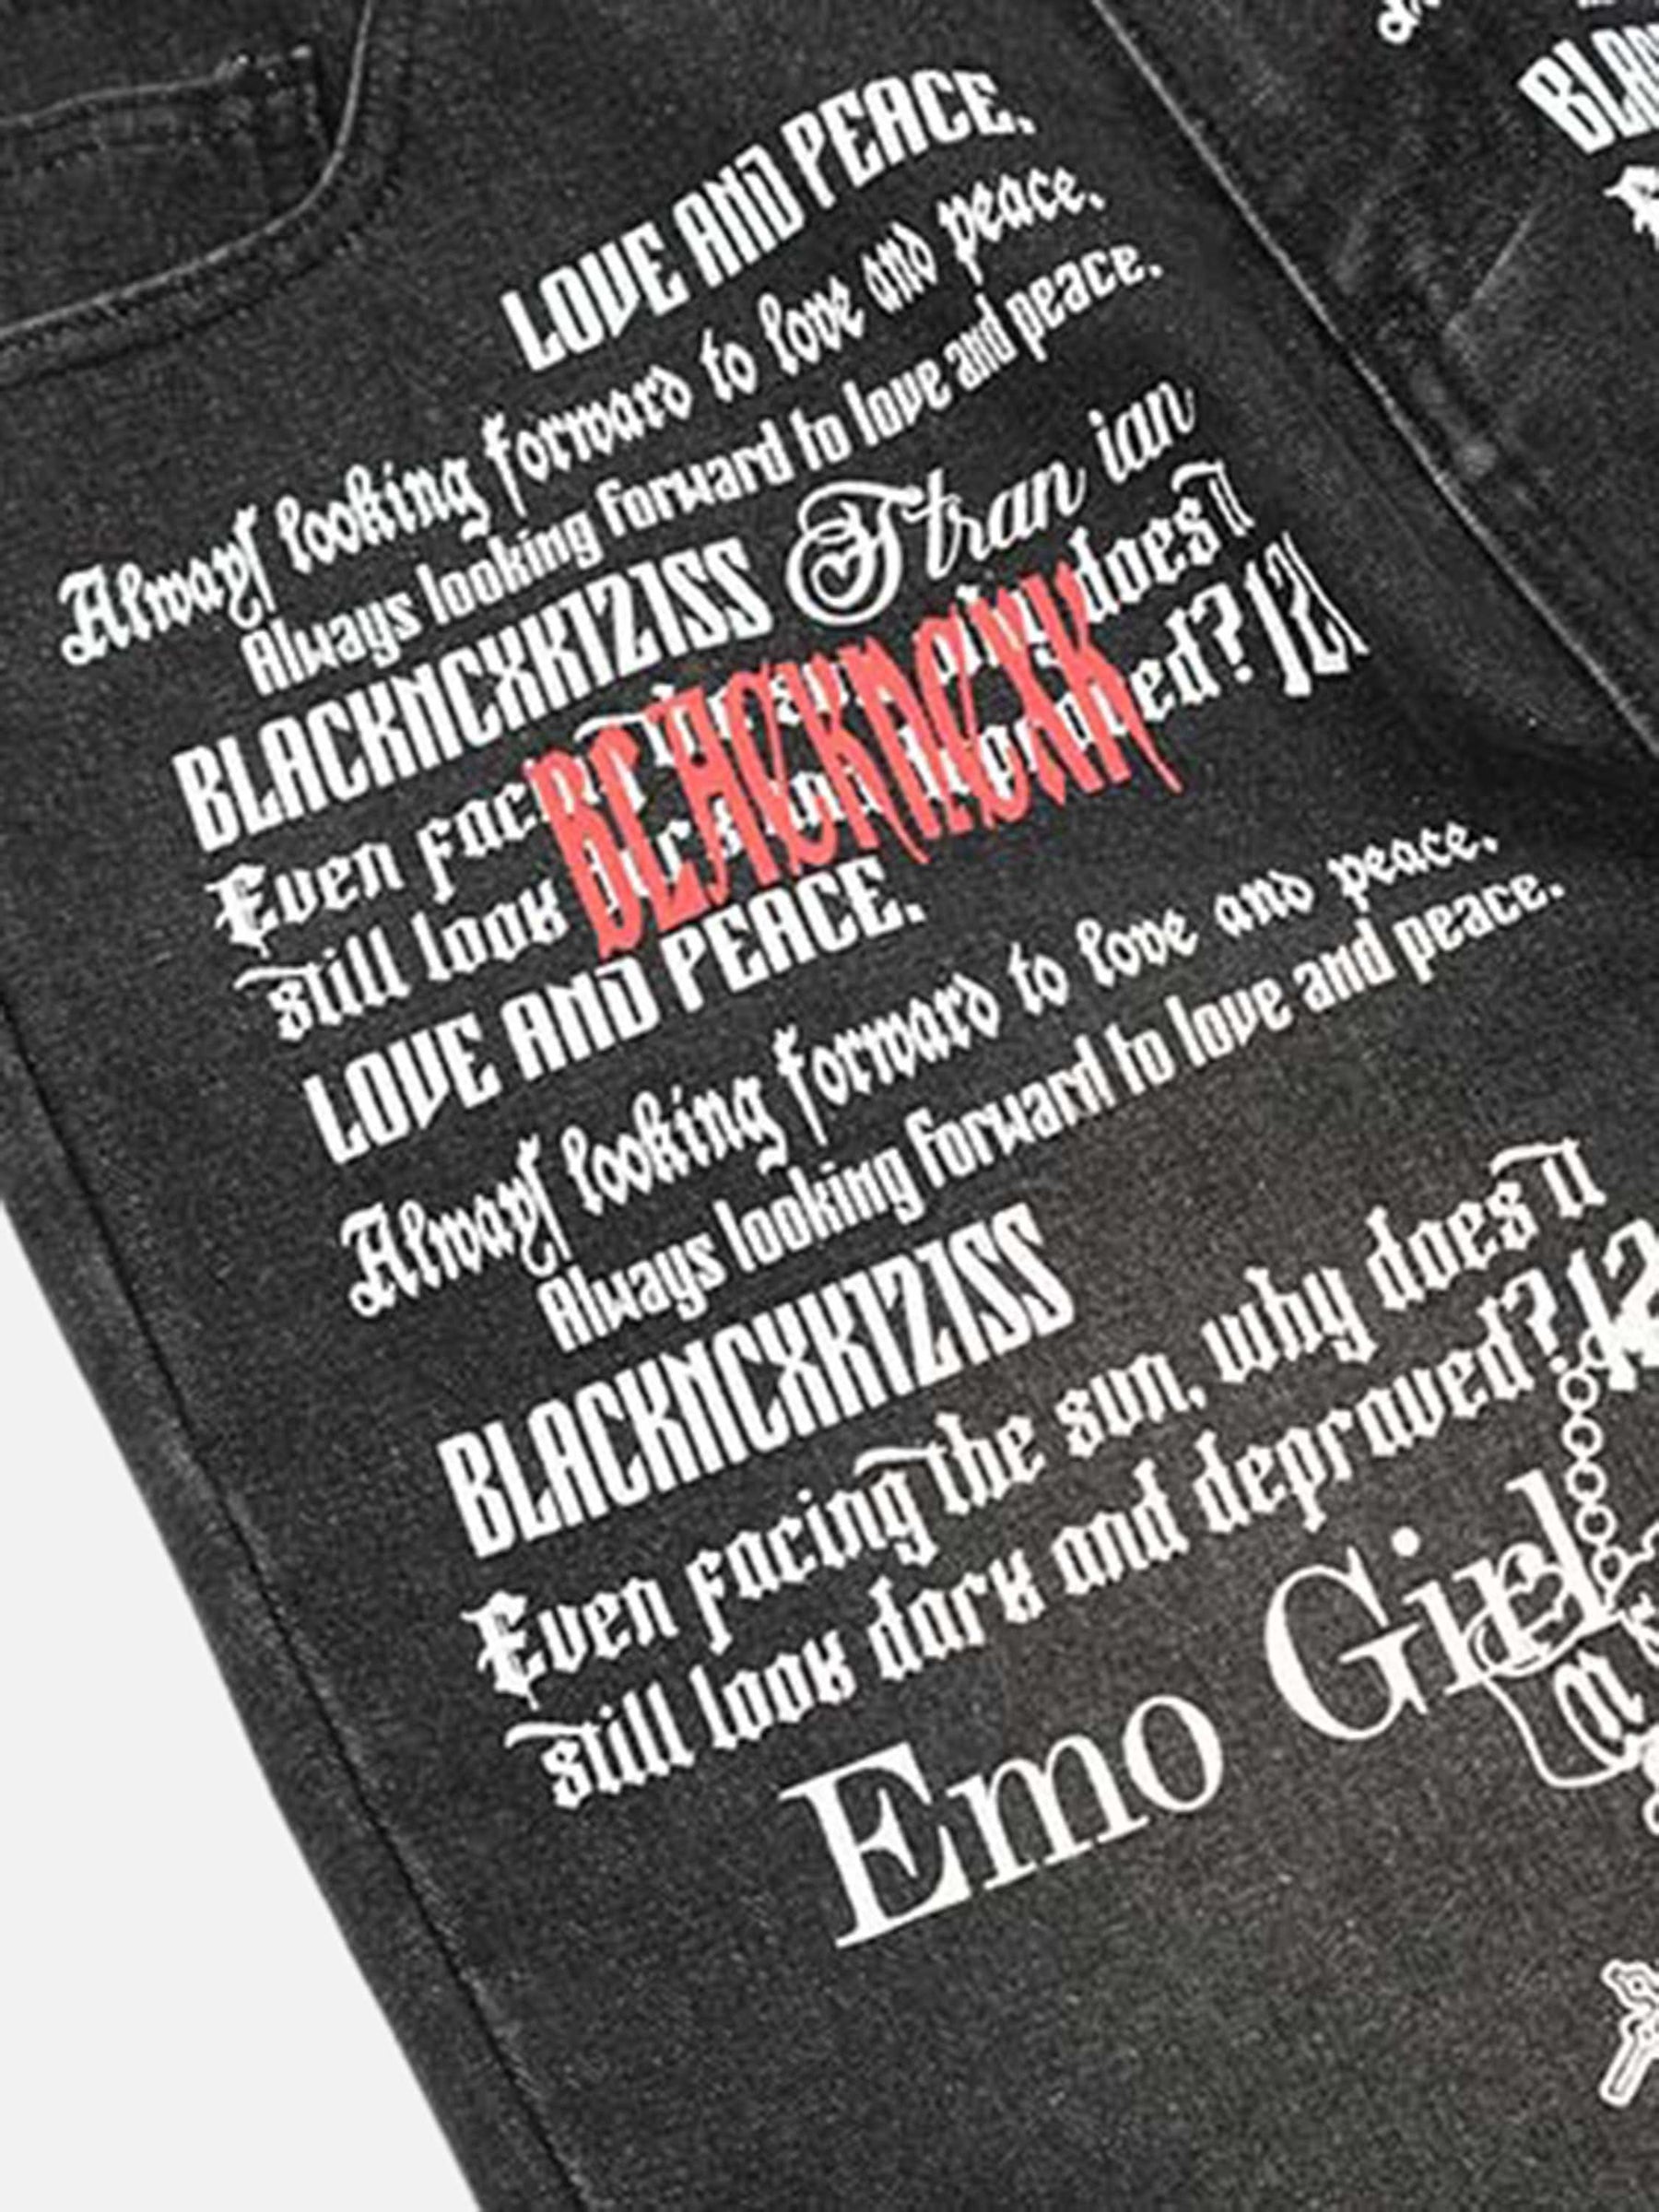 LUXENFY™ - American Wash Distressed Frayed Jeans luxenfy.com